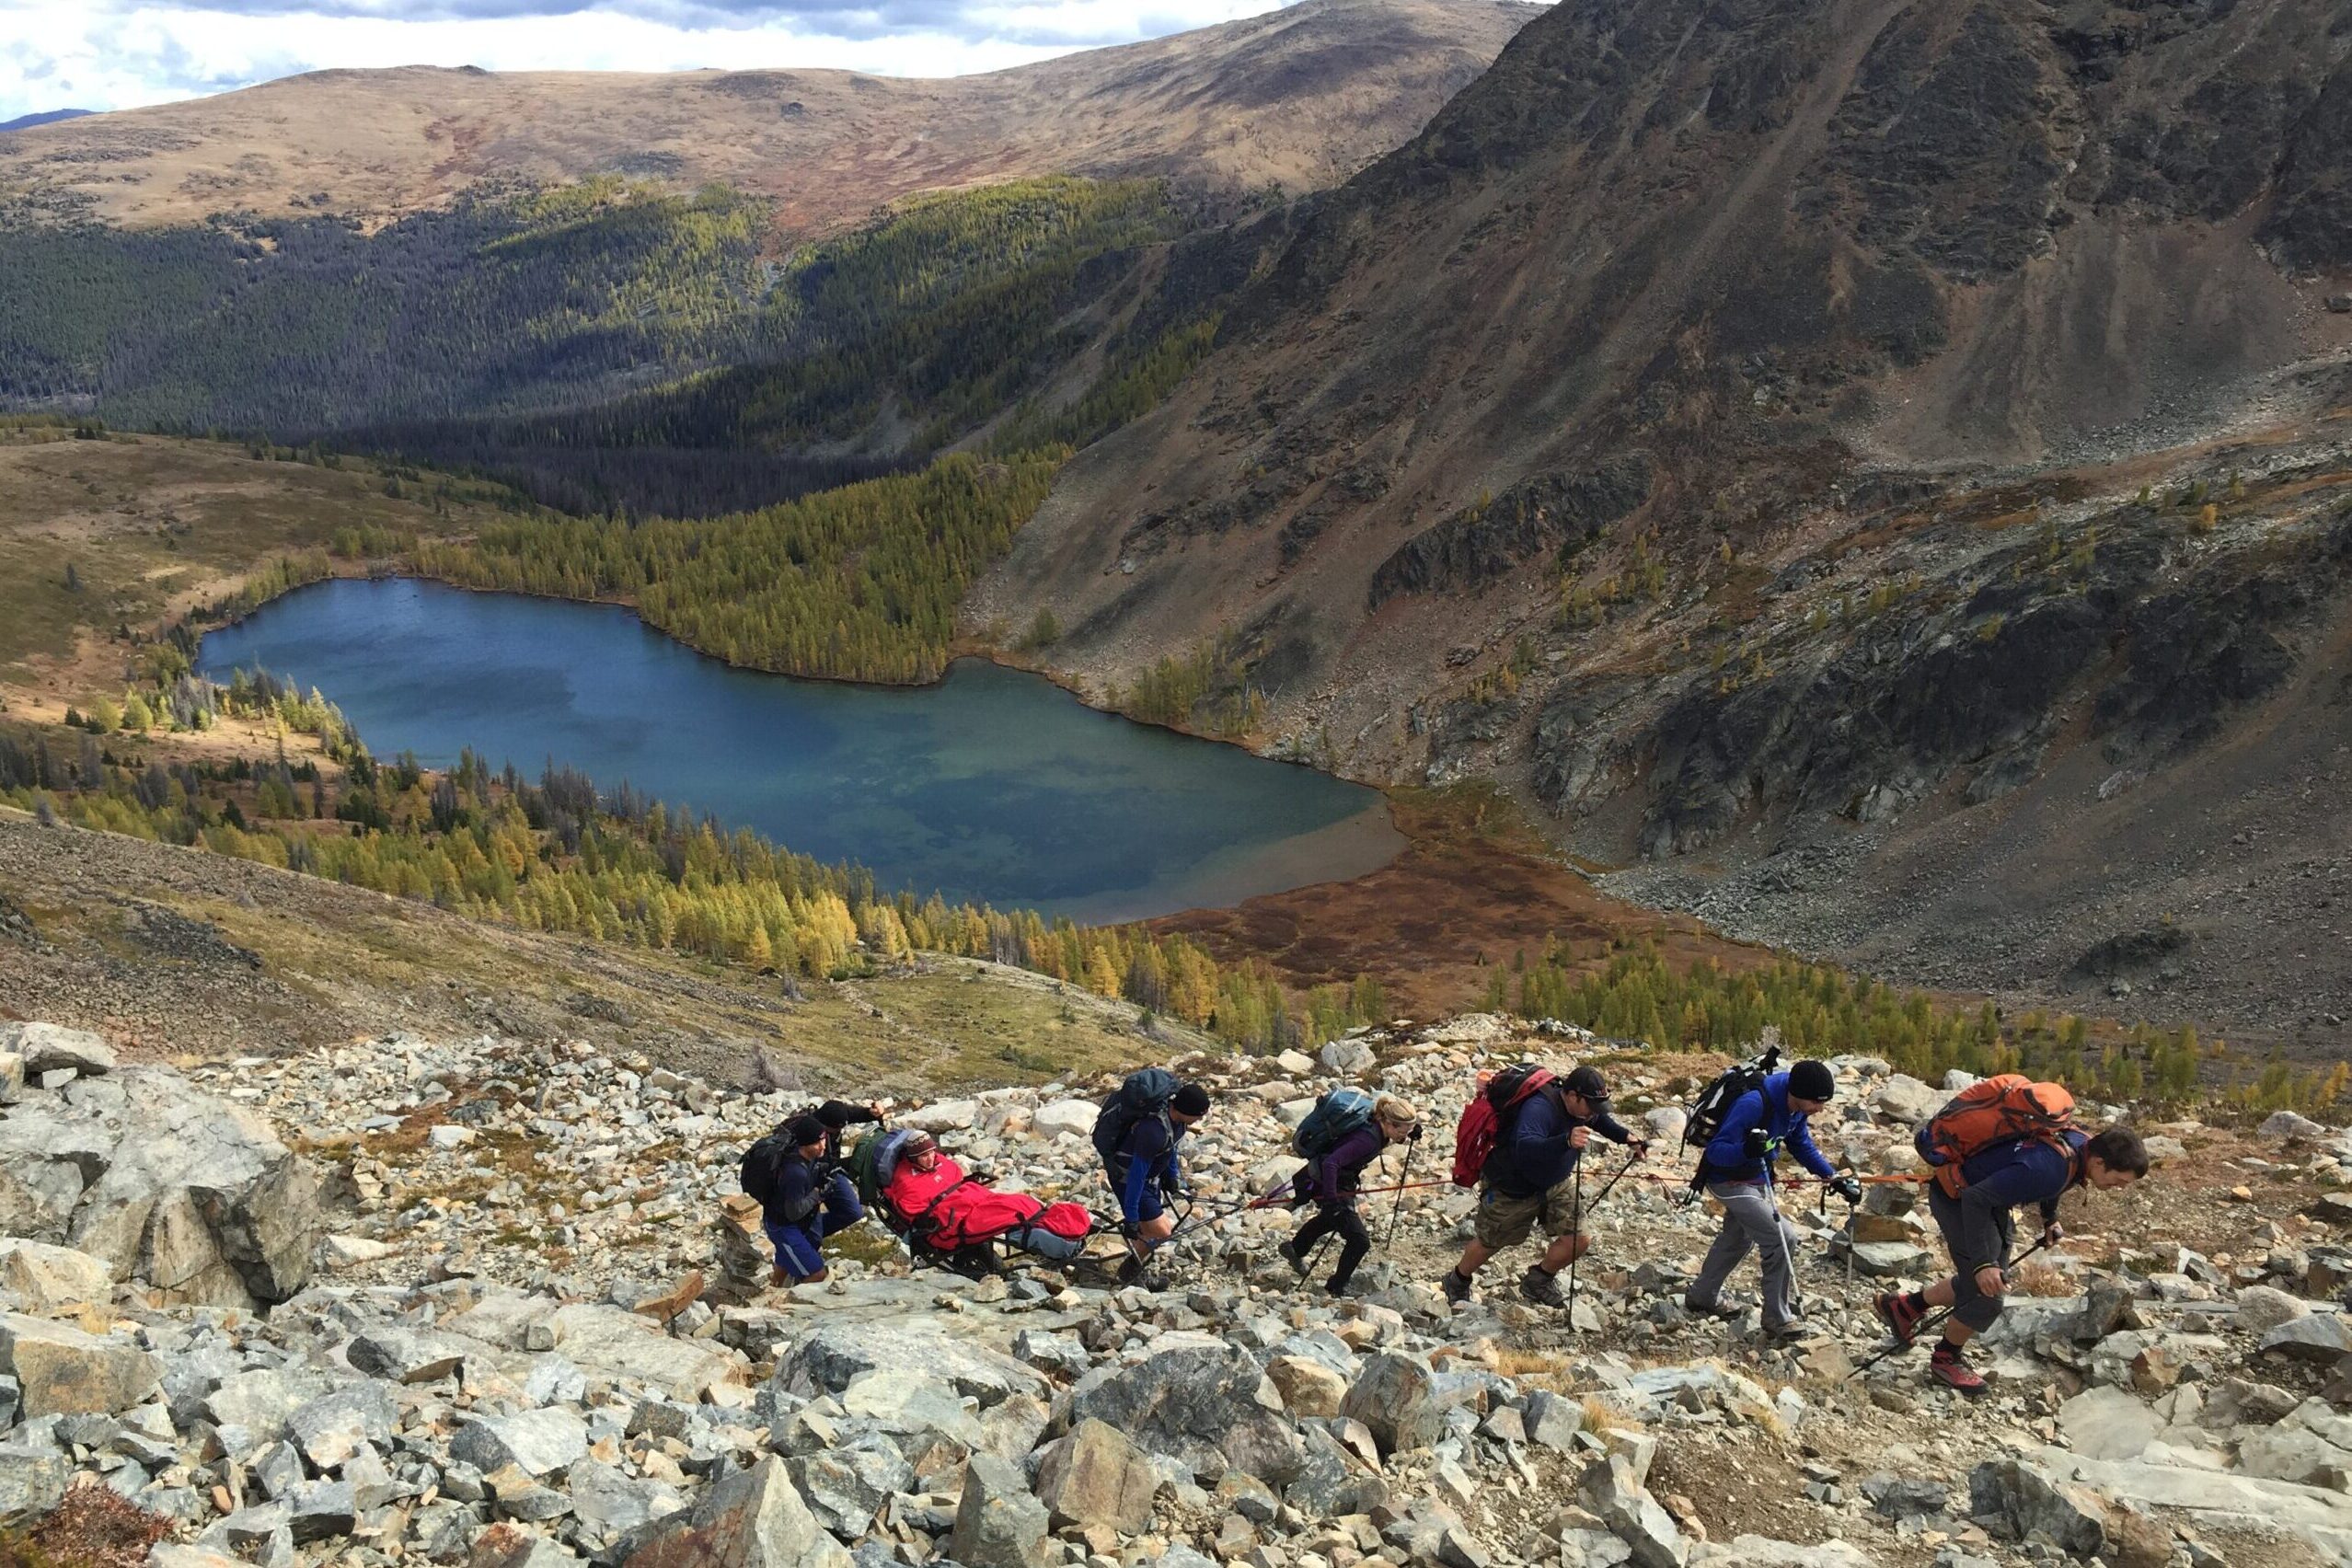 Seven hikers in rocky terrain. One is using a trailrider. There is a blue lake in the background.